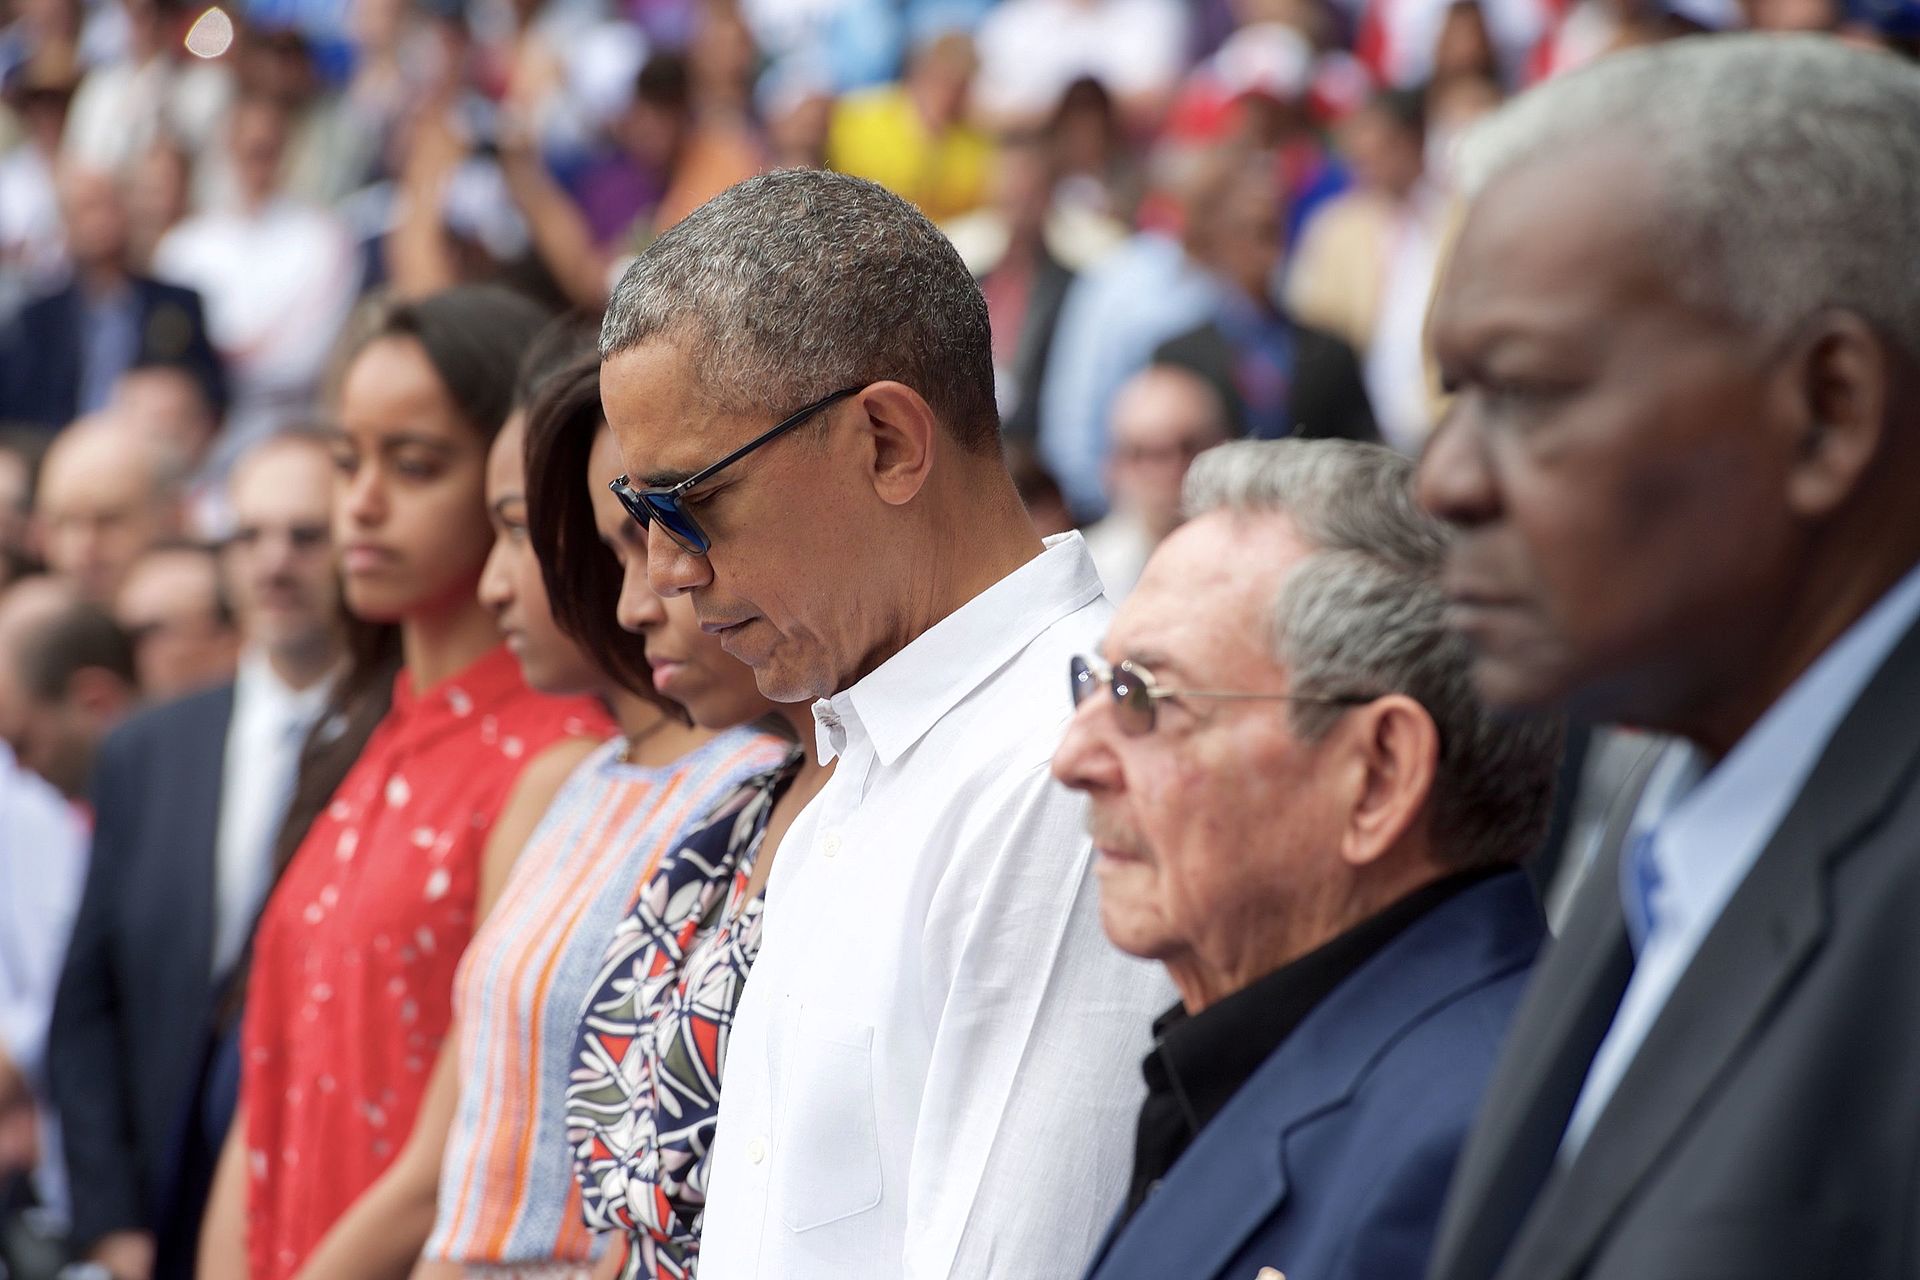 president_obama_the_first_lady_and_cuban_president_castro_observe_moment_of_silence_in_respect_to_victims_of_terrorist_attack_on_brussels_25903928701